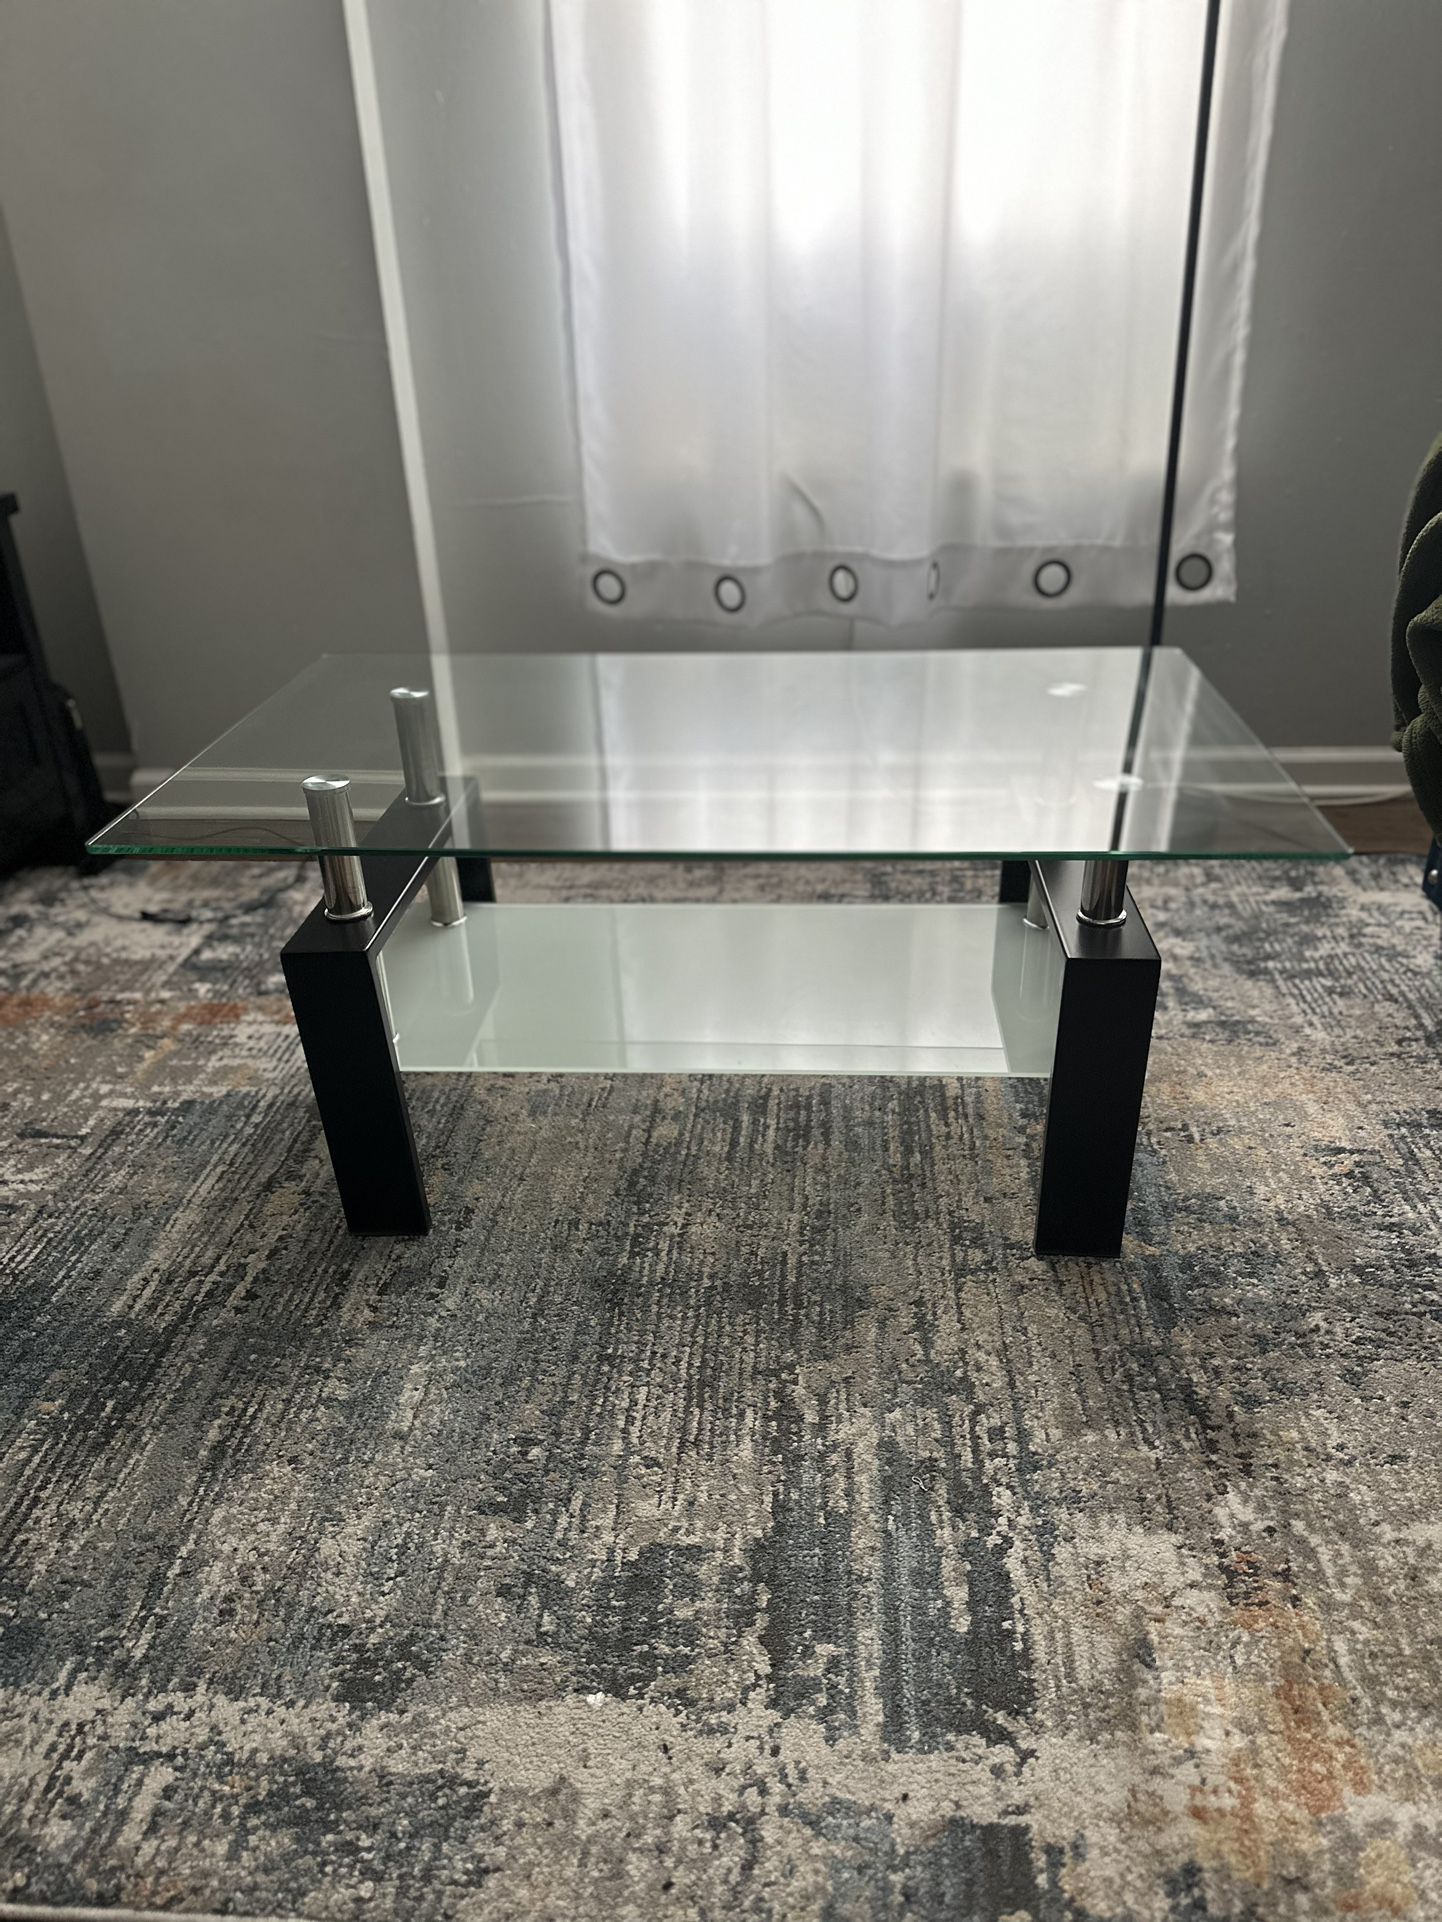 Tempered Glass Coffee Table. Two Tier. 